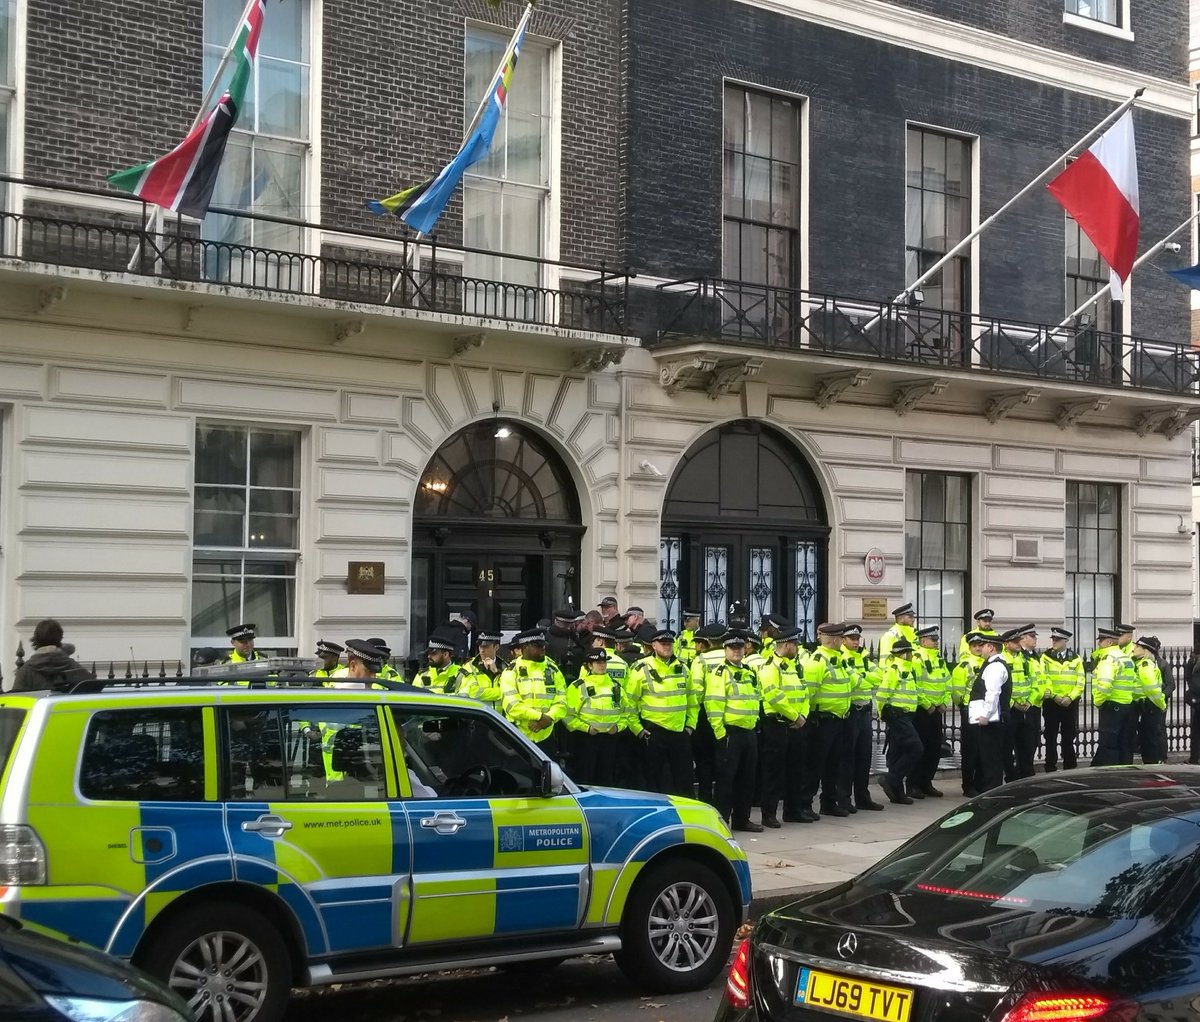 The police cutting team have arrived to remove the rebels locked on at the Kenya High Commission office in solidarity with the Sengwar people. #SolidarityNotSilence #InternationalRebellion